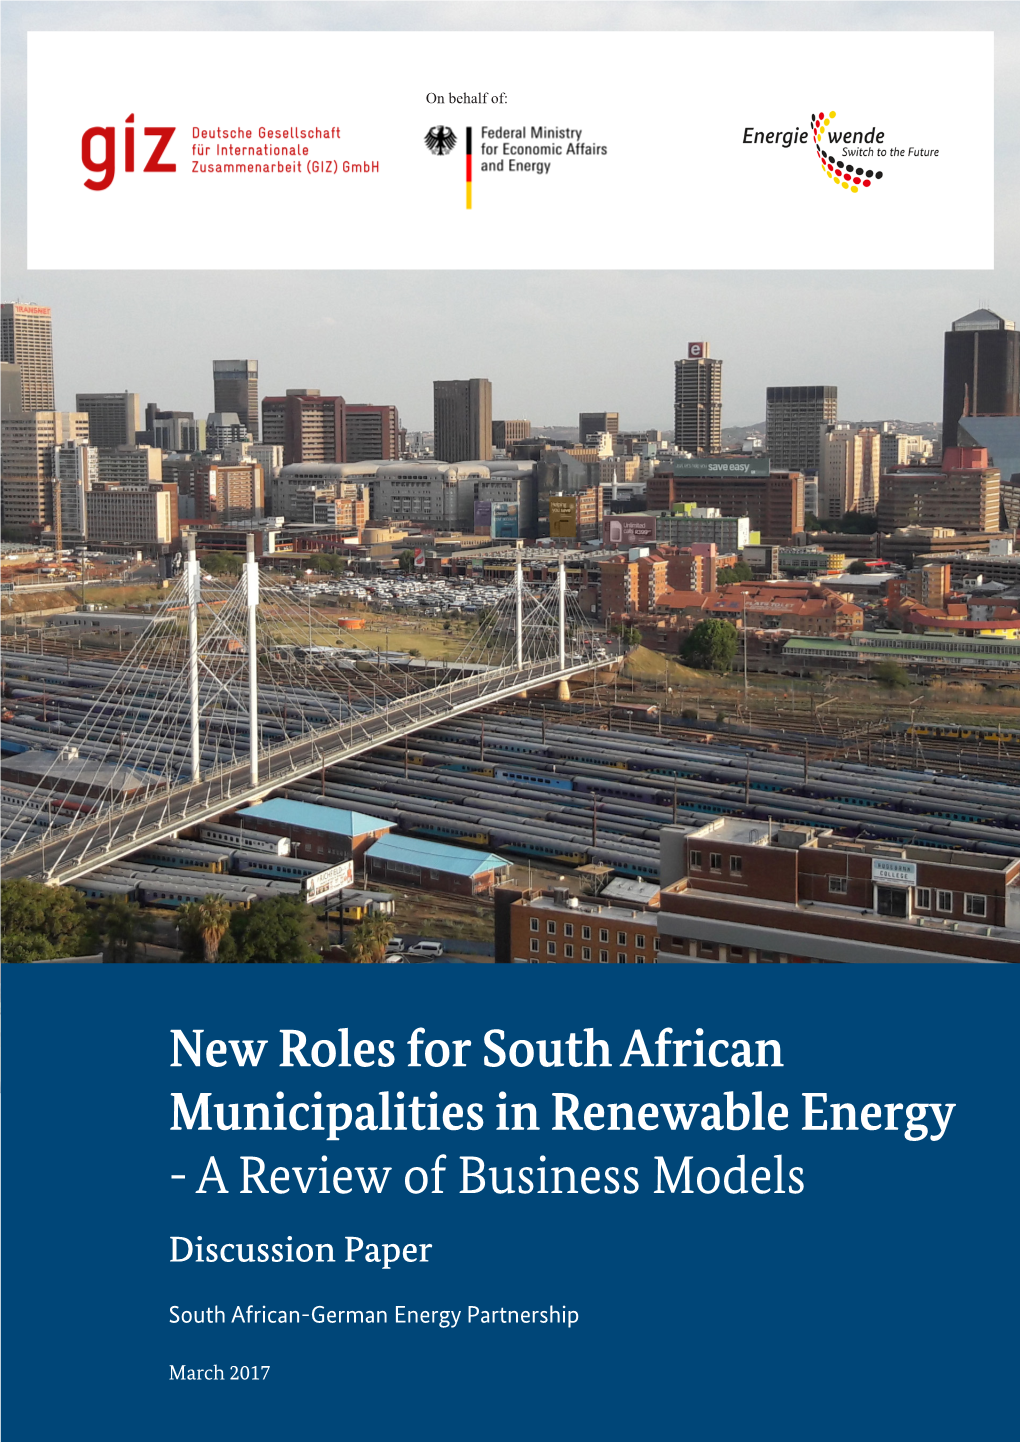 New Roles for South African Municipalities in Renewable Energy - a Review of Business Models Discussion Paper